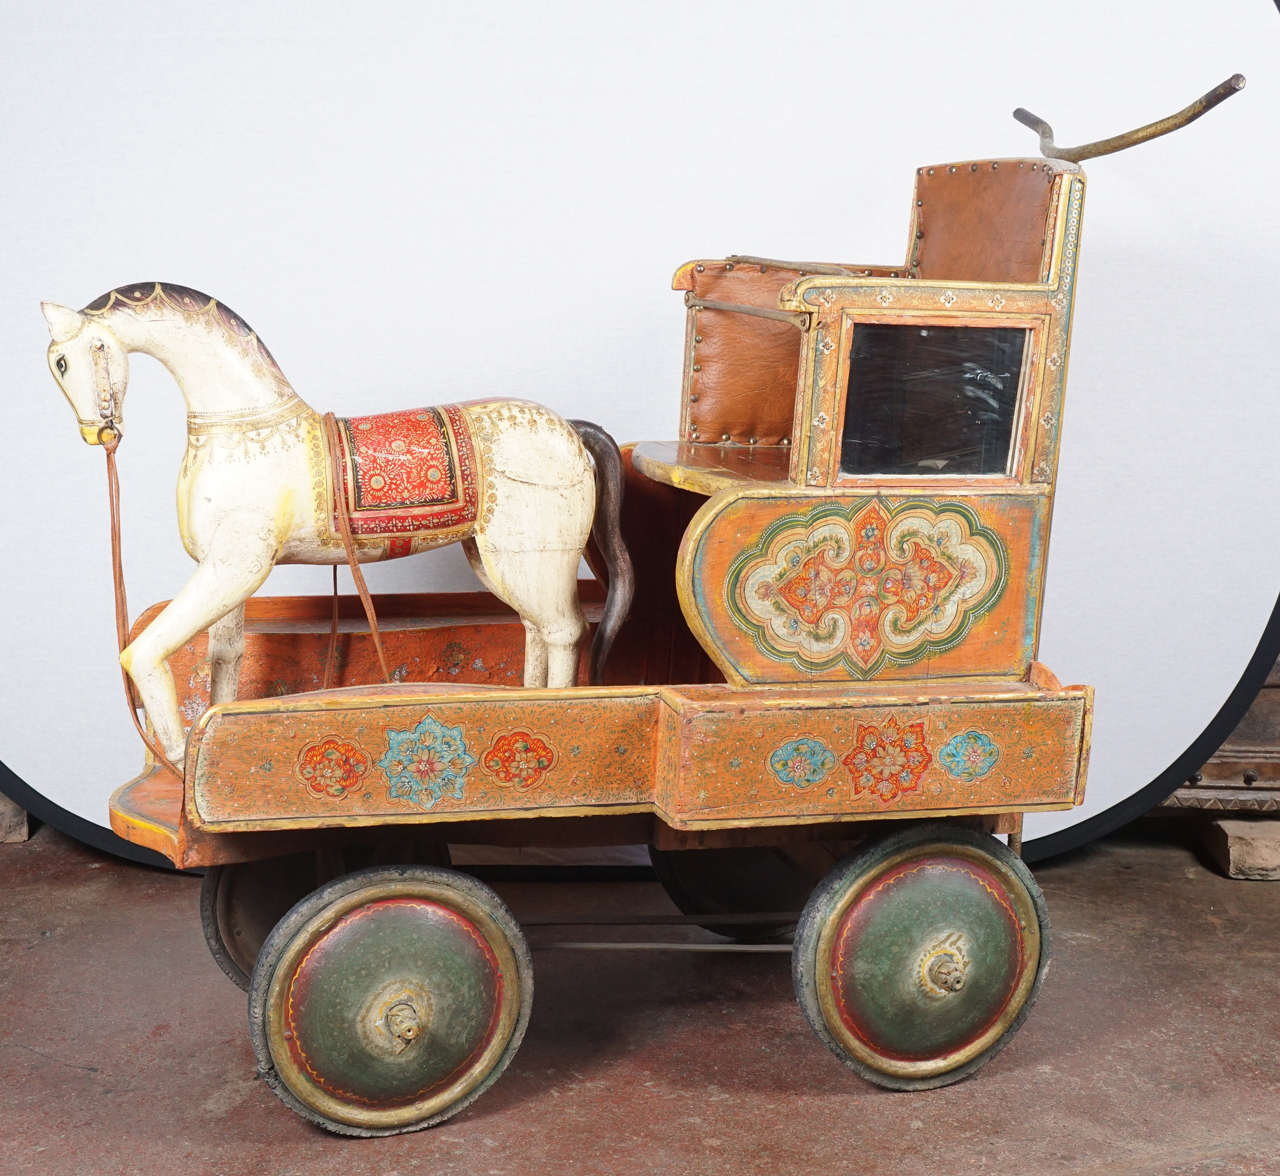 Magnificently hand-carved and hand-painted in a traditional Indian floral design, this unique piece will be a great addition as a sculptural design within an Interior space. Wheels and mechanisms are in function. Upholstery in brown leather and